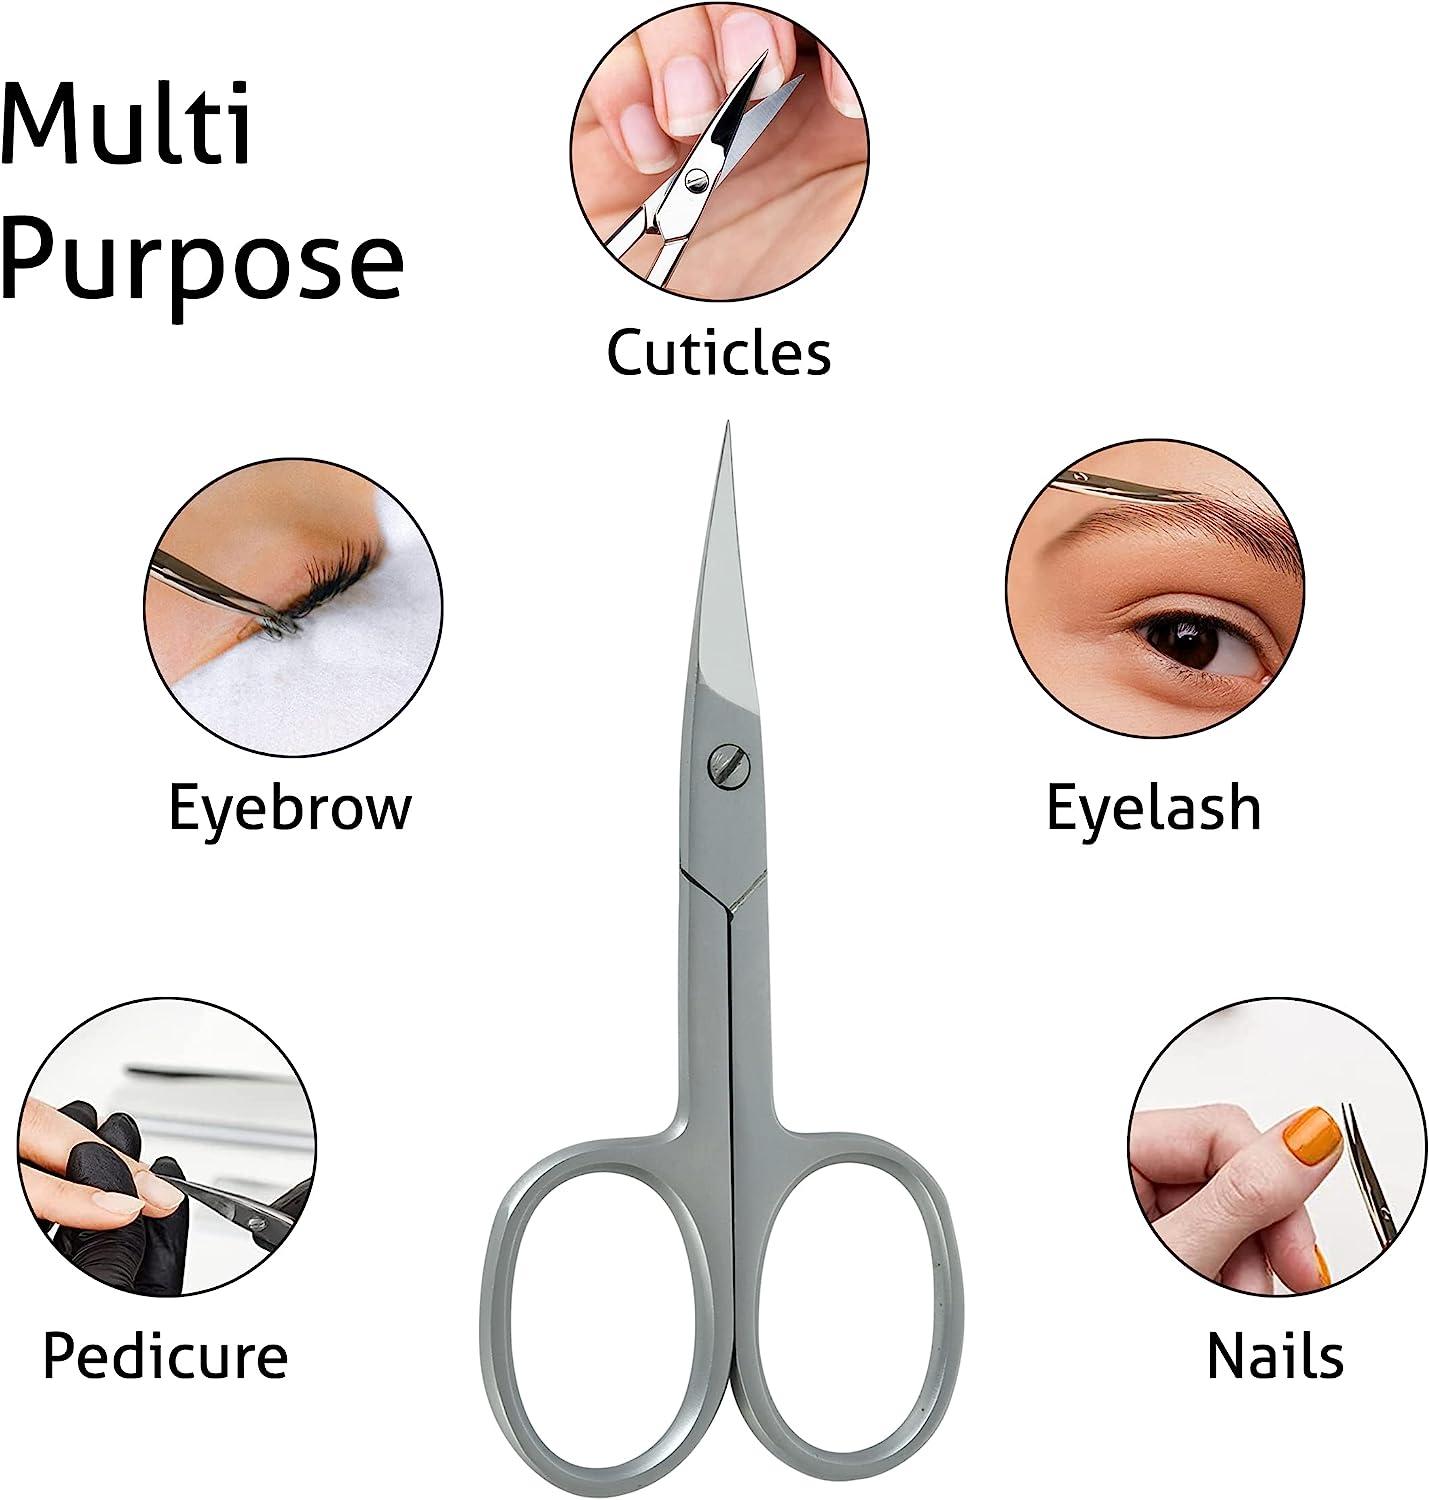 Multi-function Cuticle Small Scissors Used for Men and Women